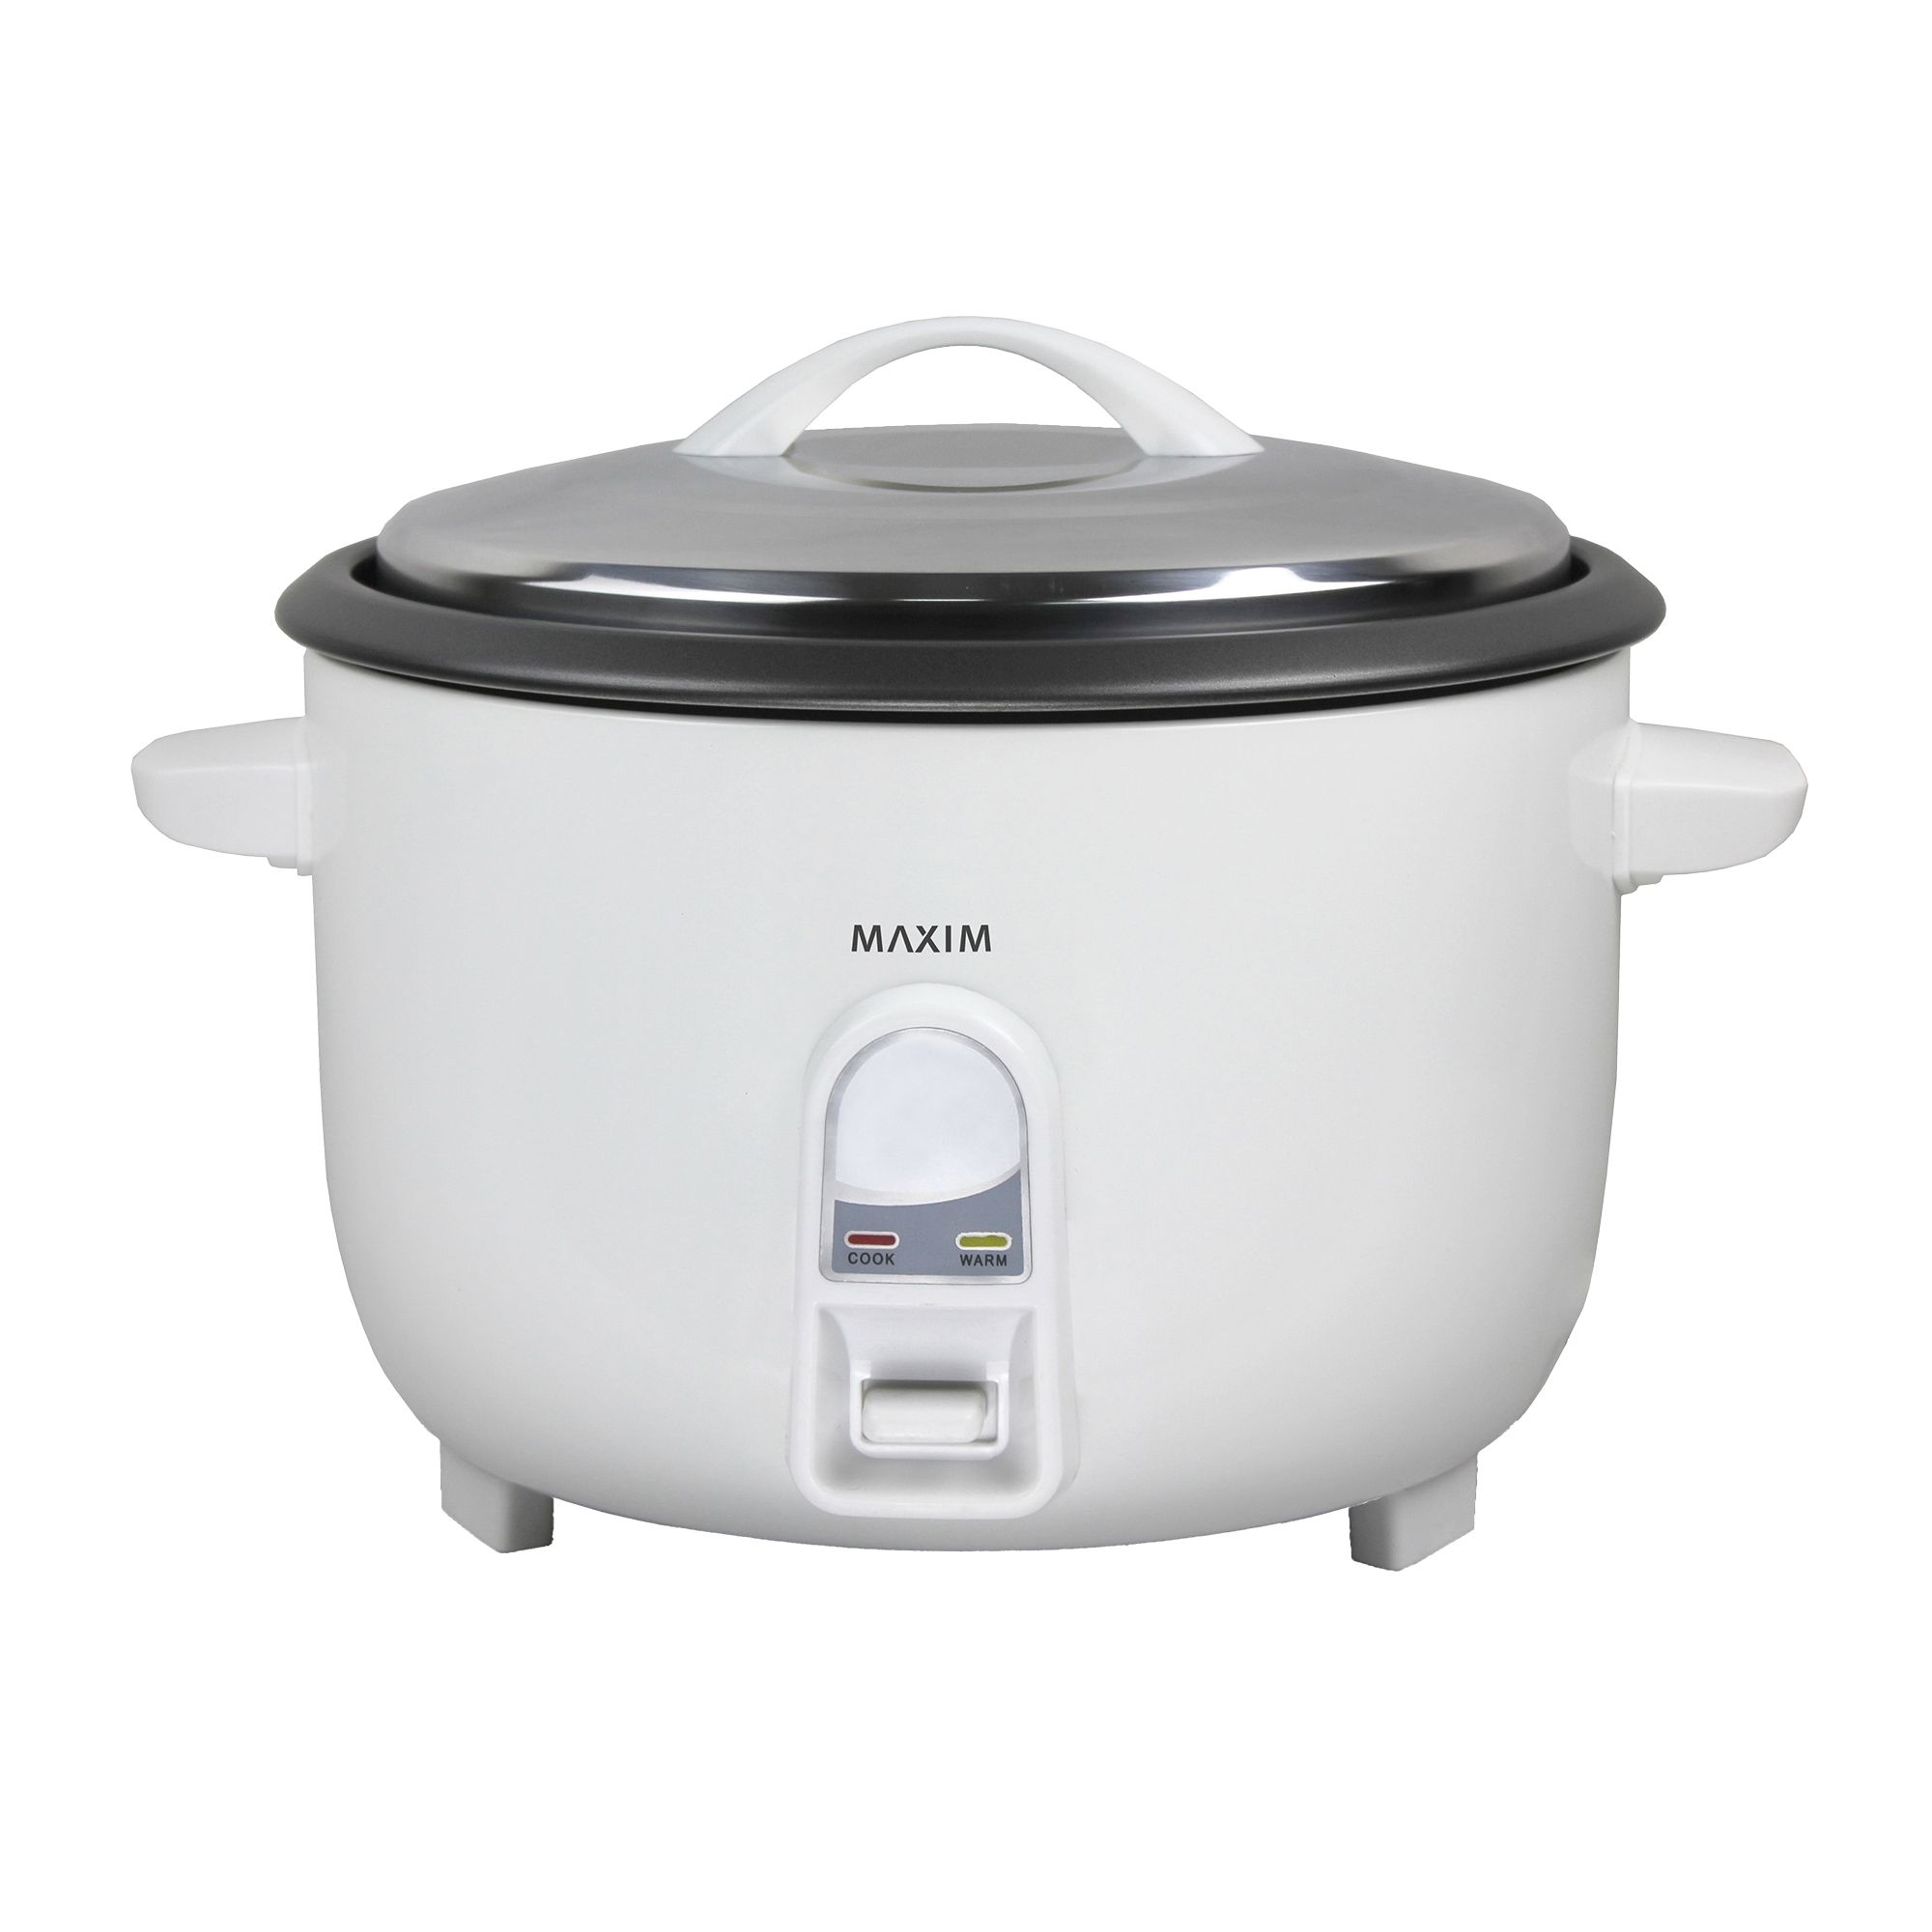 Maxim Rice Cooker 30 Cup White Image 1